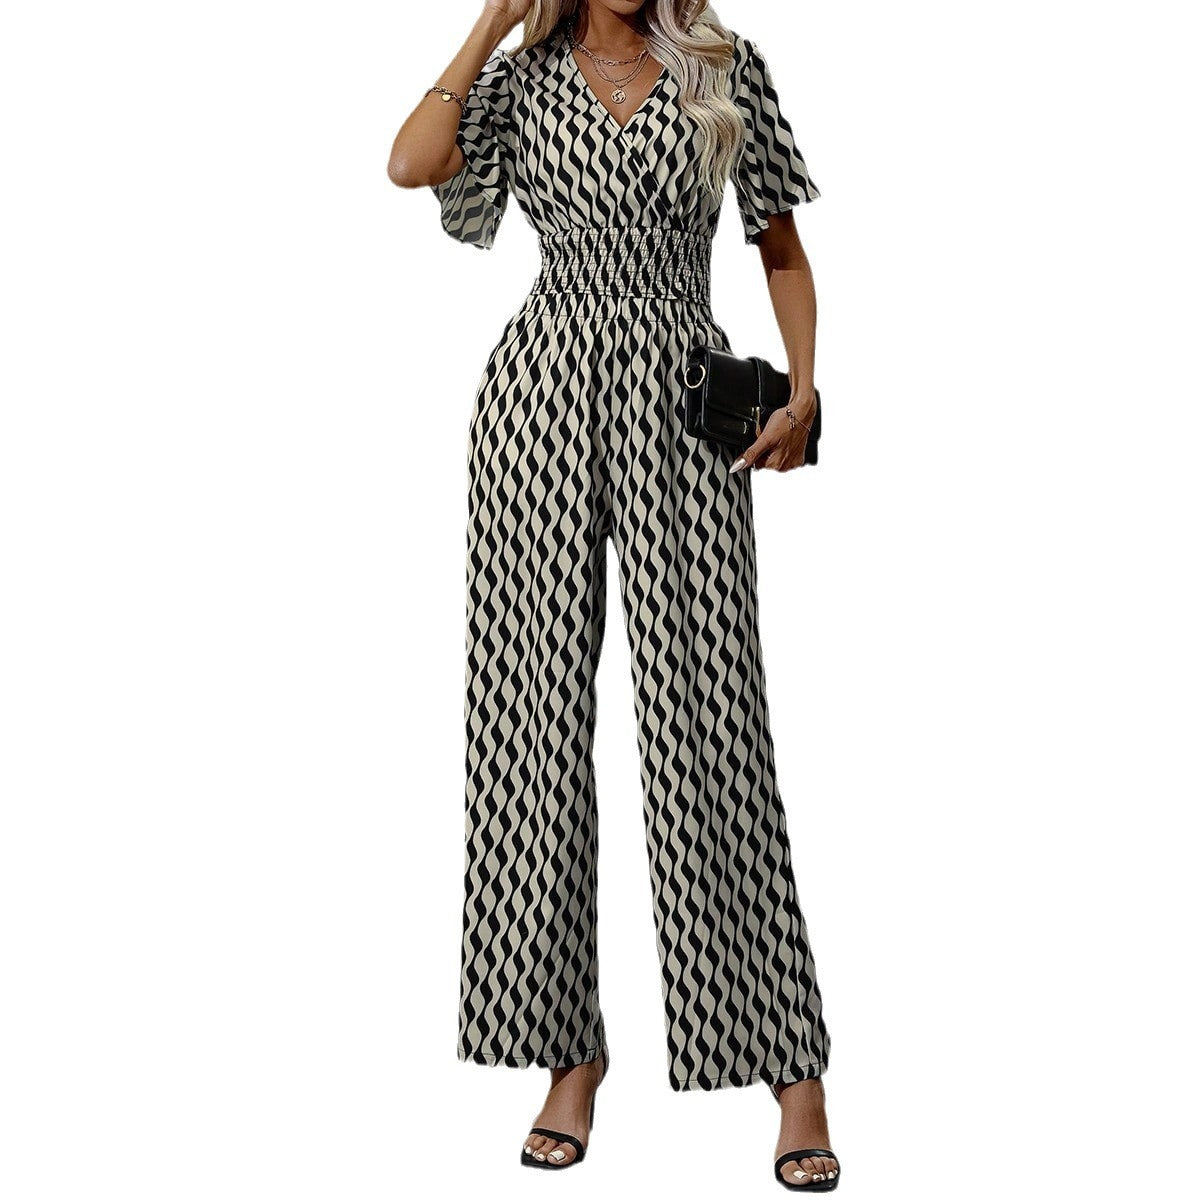 Women's Fashionable Printed Loose Trousers Suit